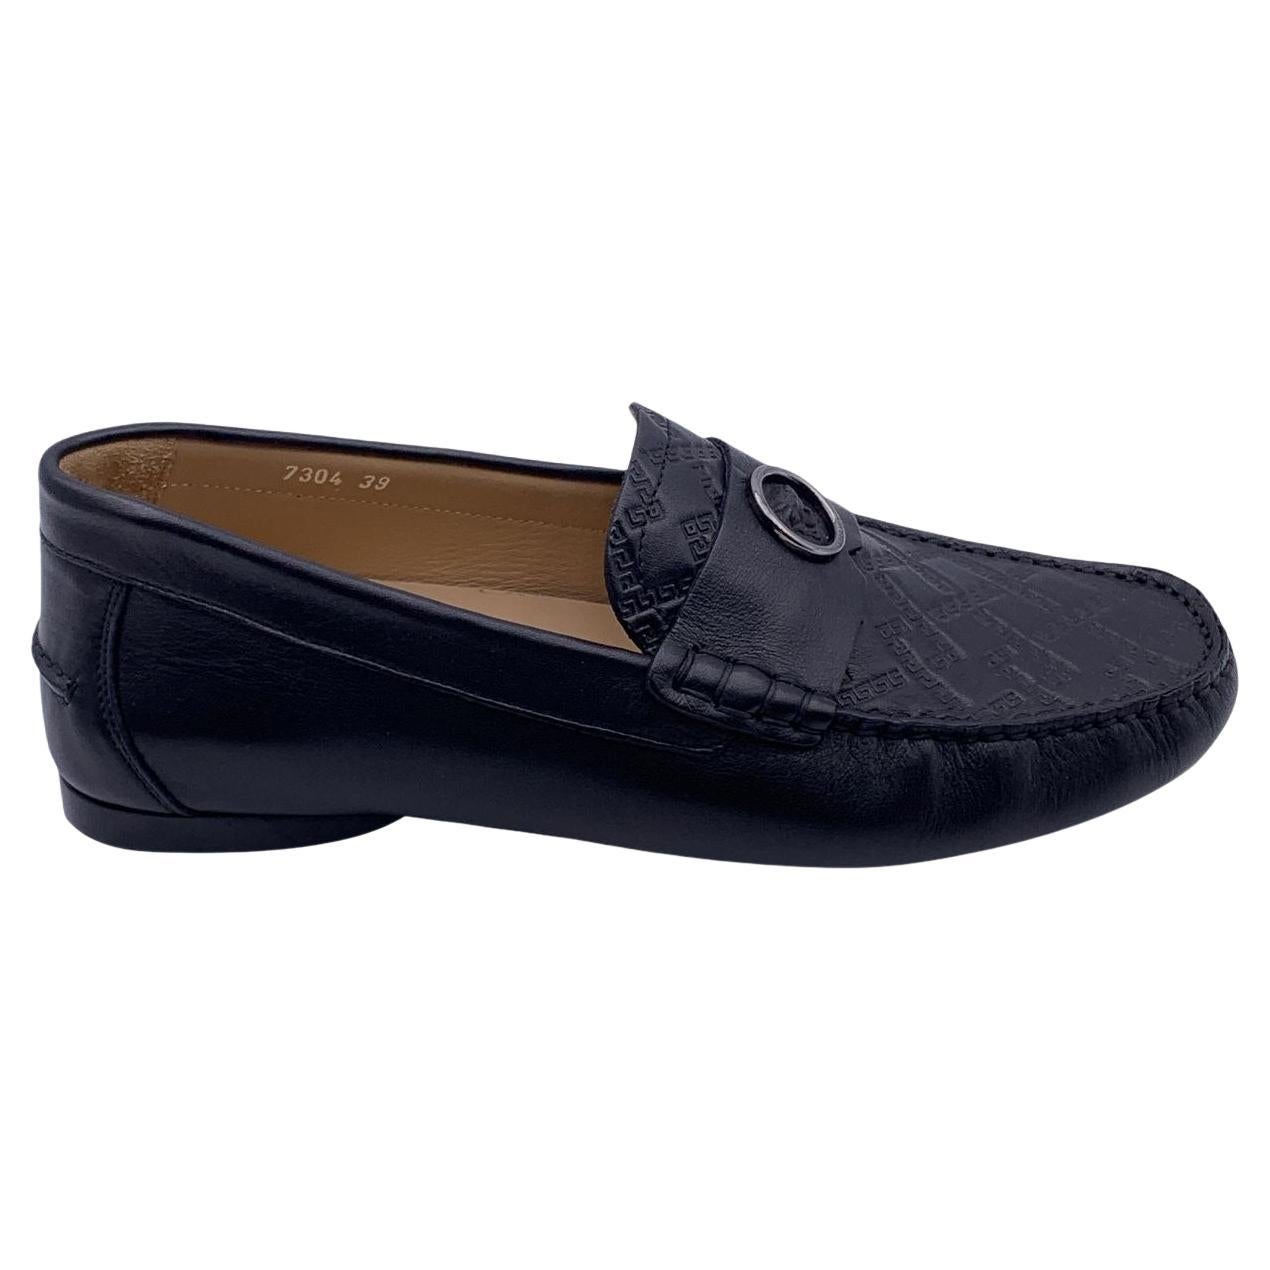 Versace Black Embossed Leather Mocassins Loafers Car Shoes Size 39 For Sale